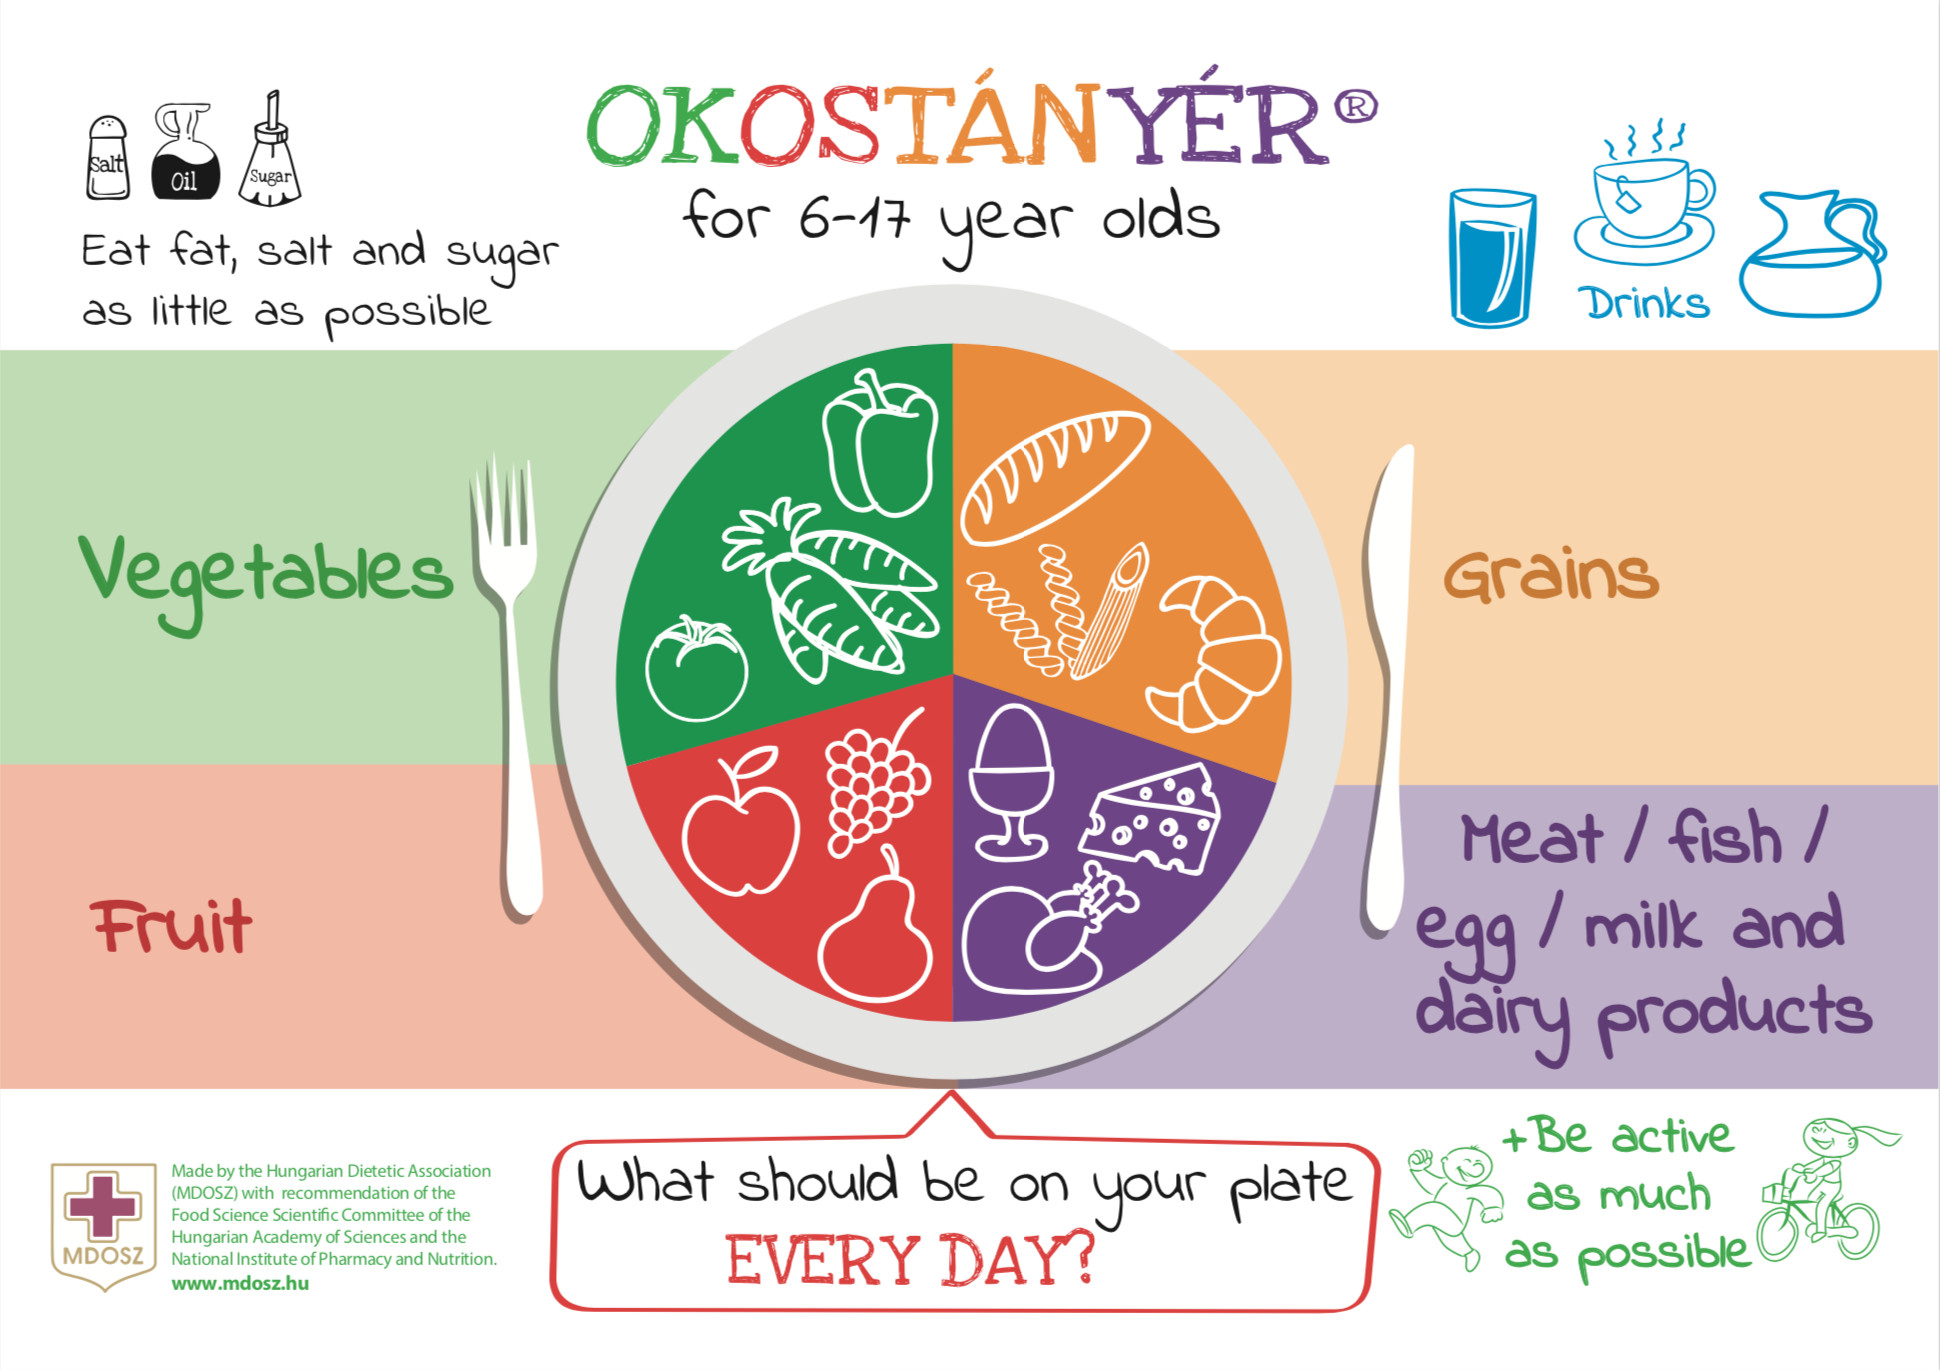 OKOSTÁNYÉR ® for 6-17 year olds (in English)